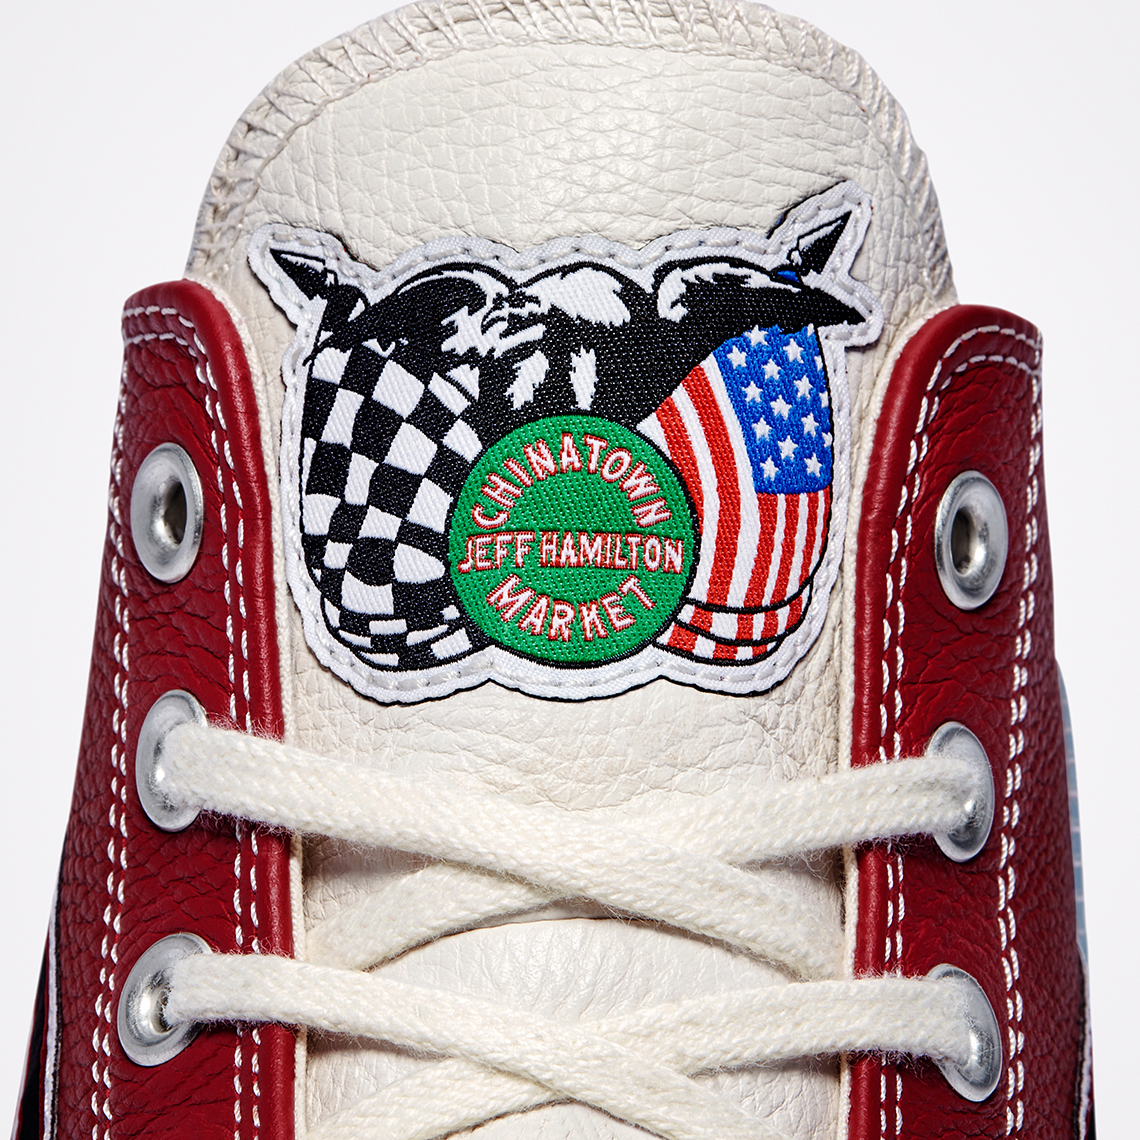 Chinatown Market The Converse Chuck Taylor 2 will be part of Converse latest collaboration Bulls 1